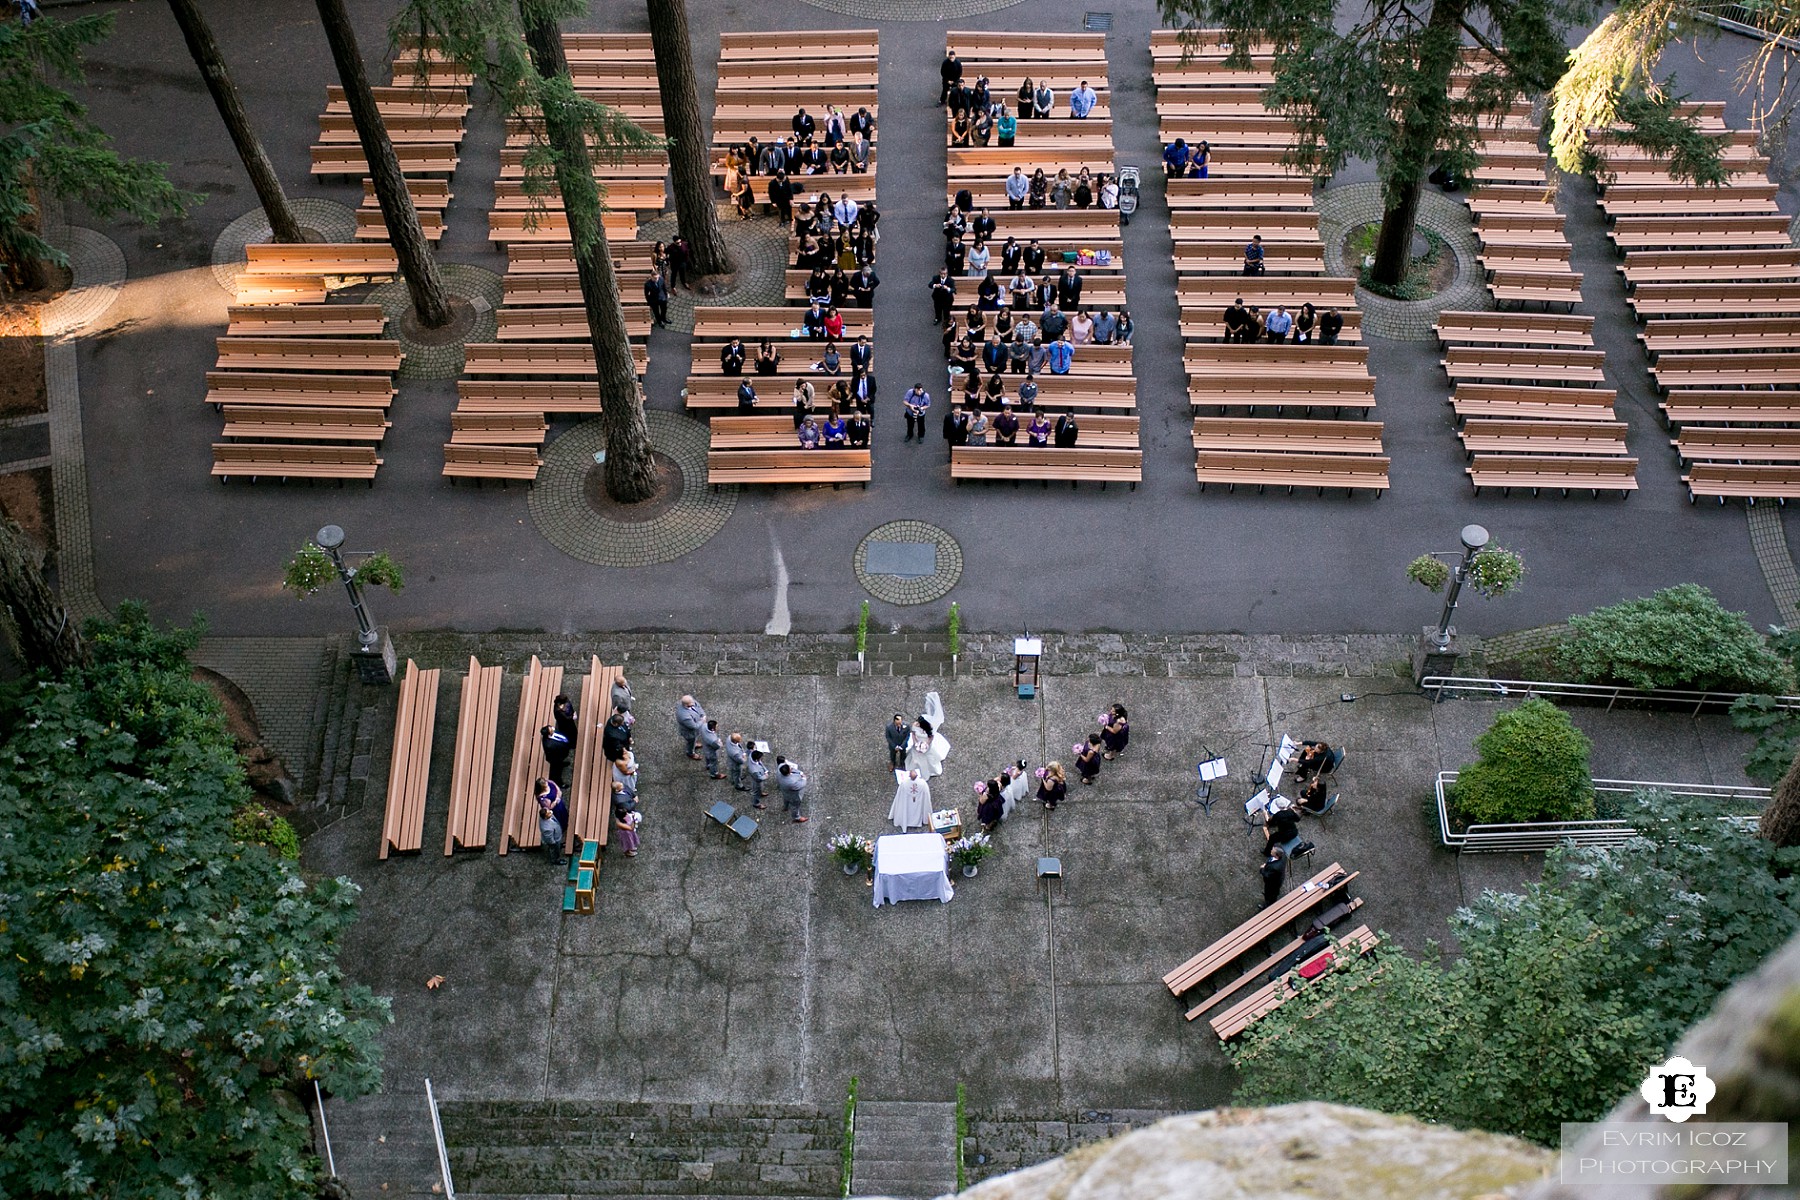 Wedding at The Grotto, Portland